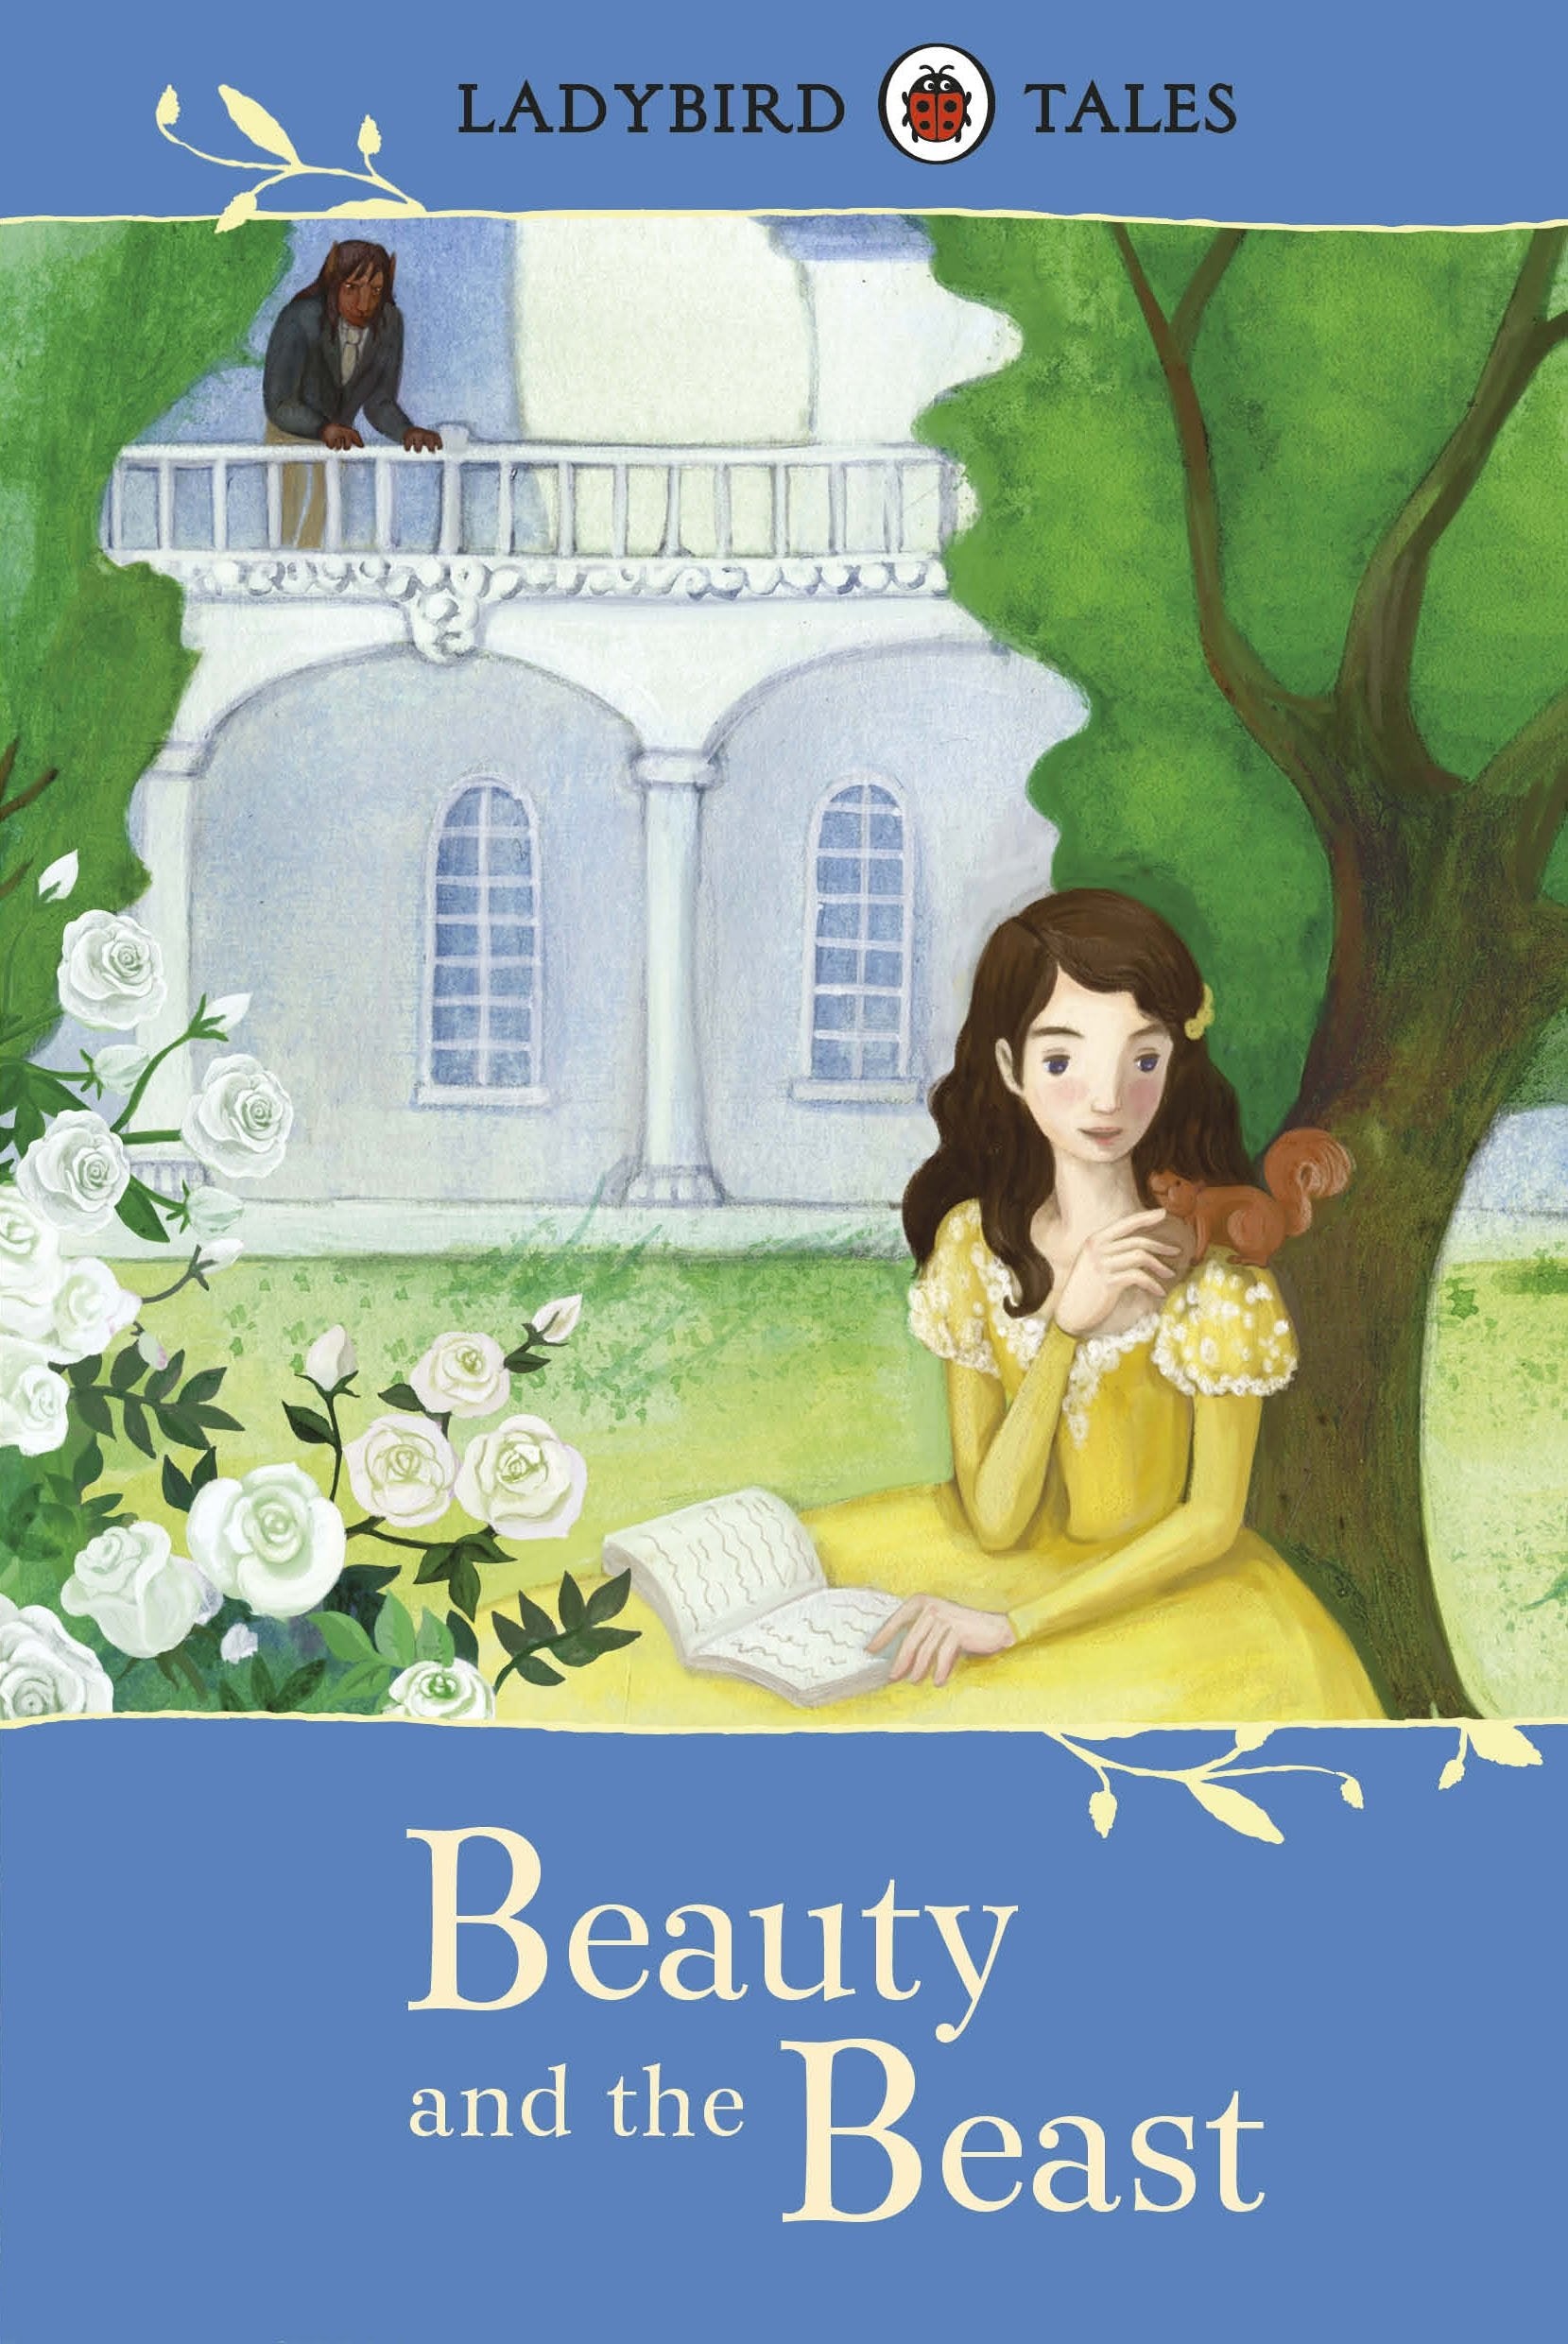 Ladybird Tales Beauty and the Beast : Hardcover